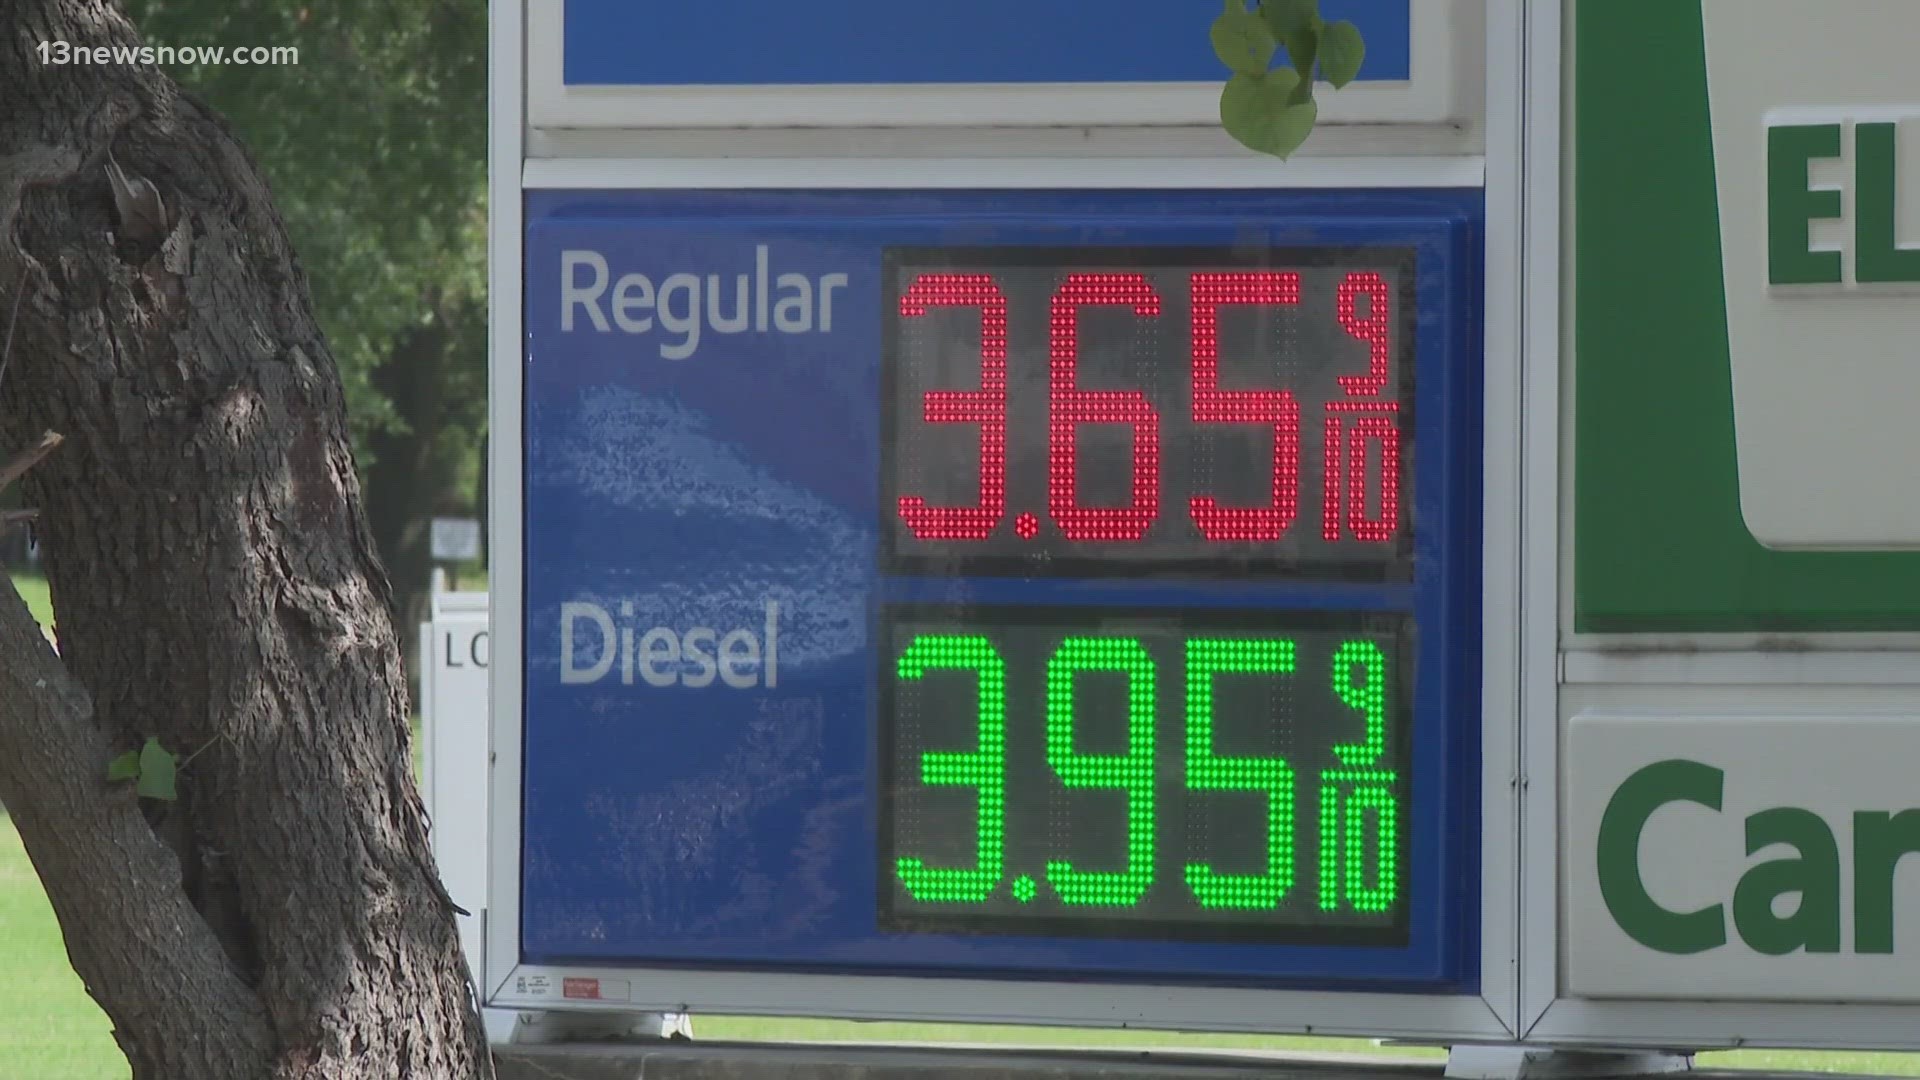 Why are gas prices going up? Experts point to 2 big reasons